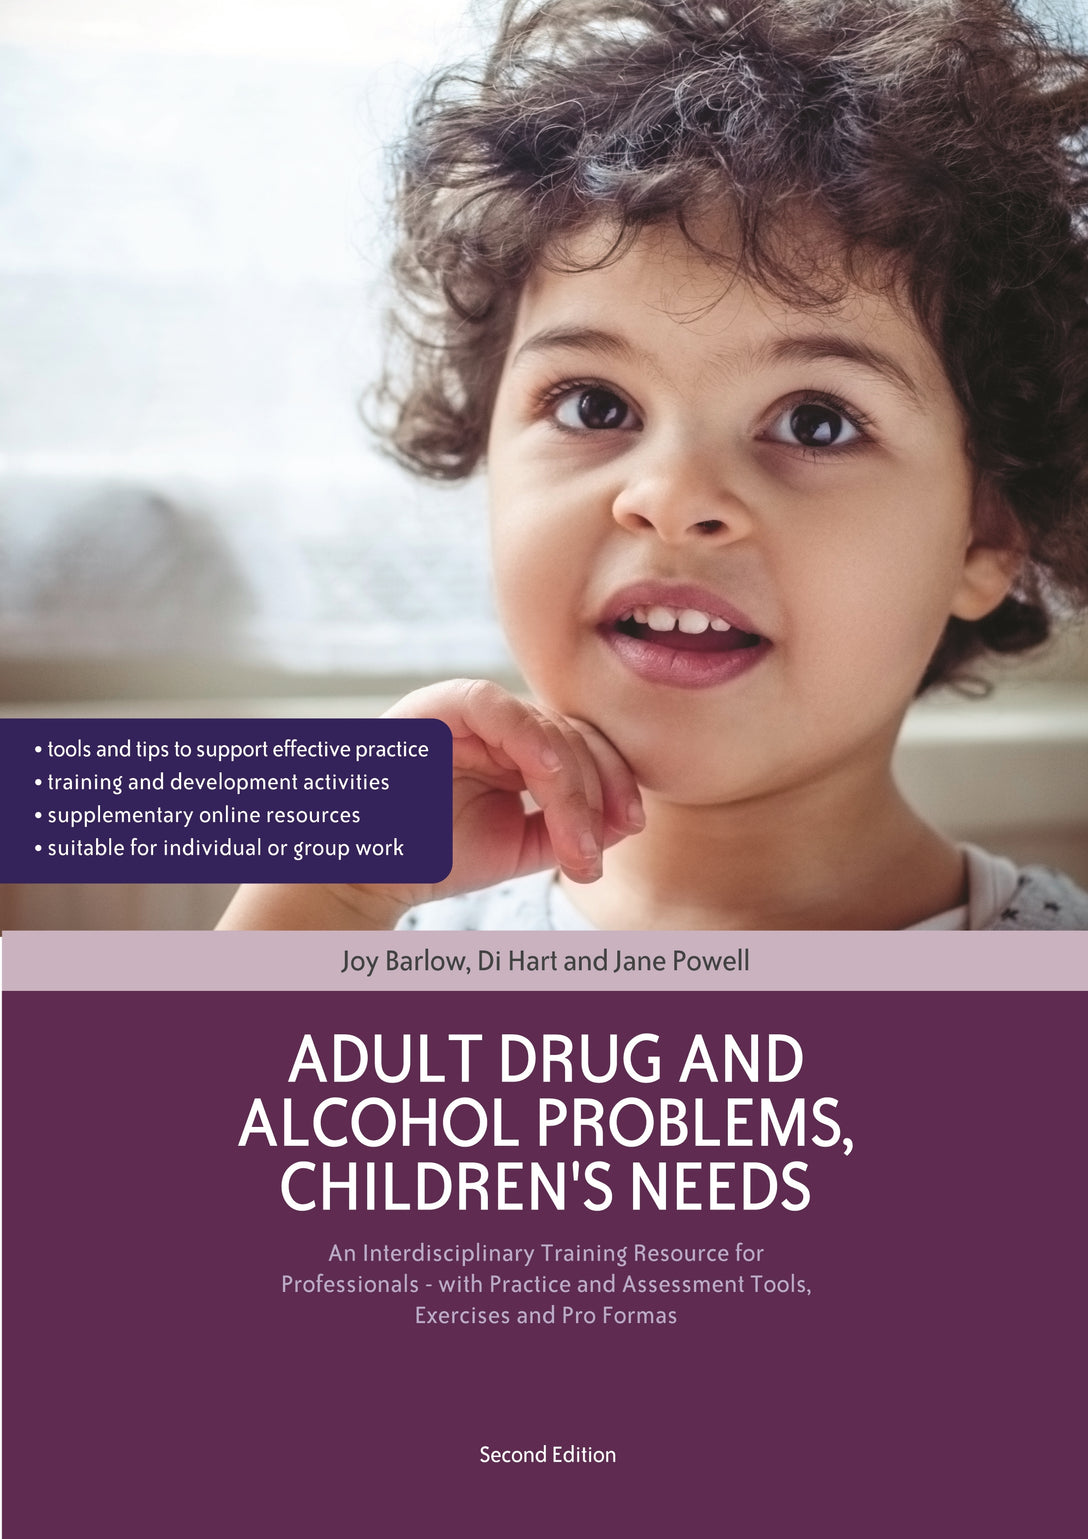 Adult Drug and Alcohol Problems, Children's Needs, Second Edition by Joy Barlow, Di Hart, Jane Powell